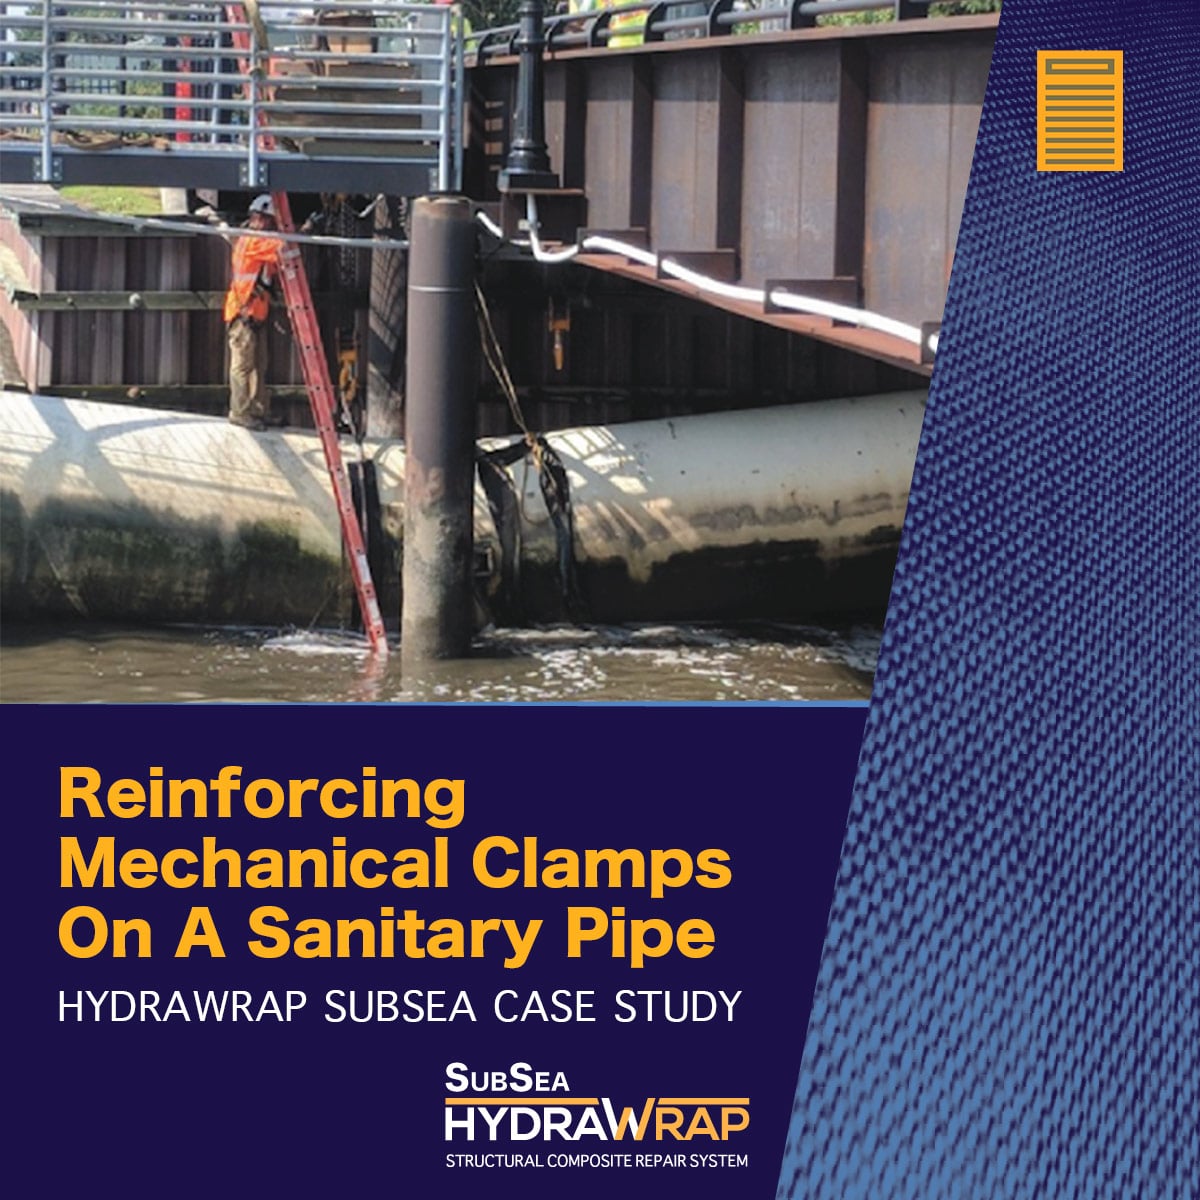 Sanitary Pipe being repaired, 'Reinforcing Mechanical Clamps On A Sanitary Pipe, HydraWrap SubSea Case Study'